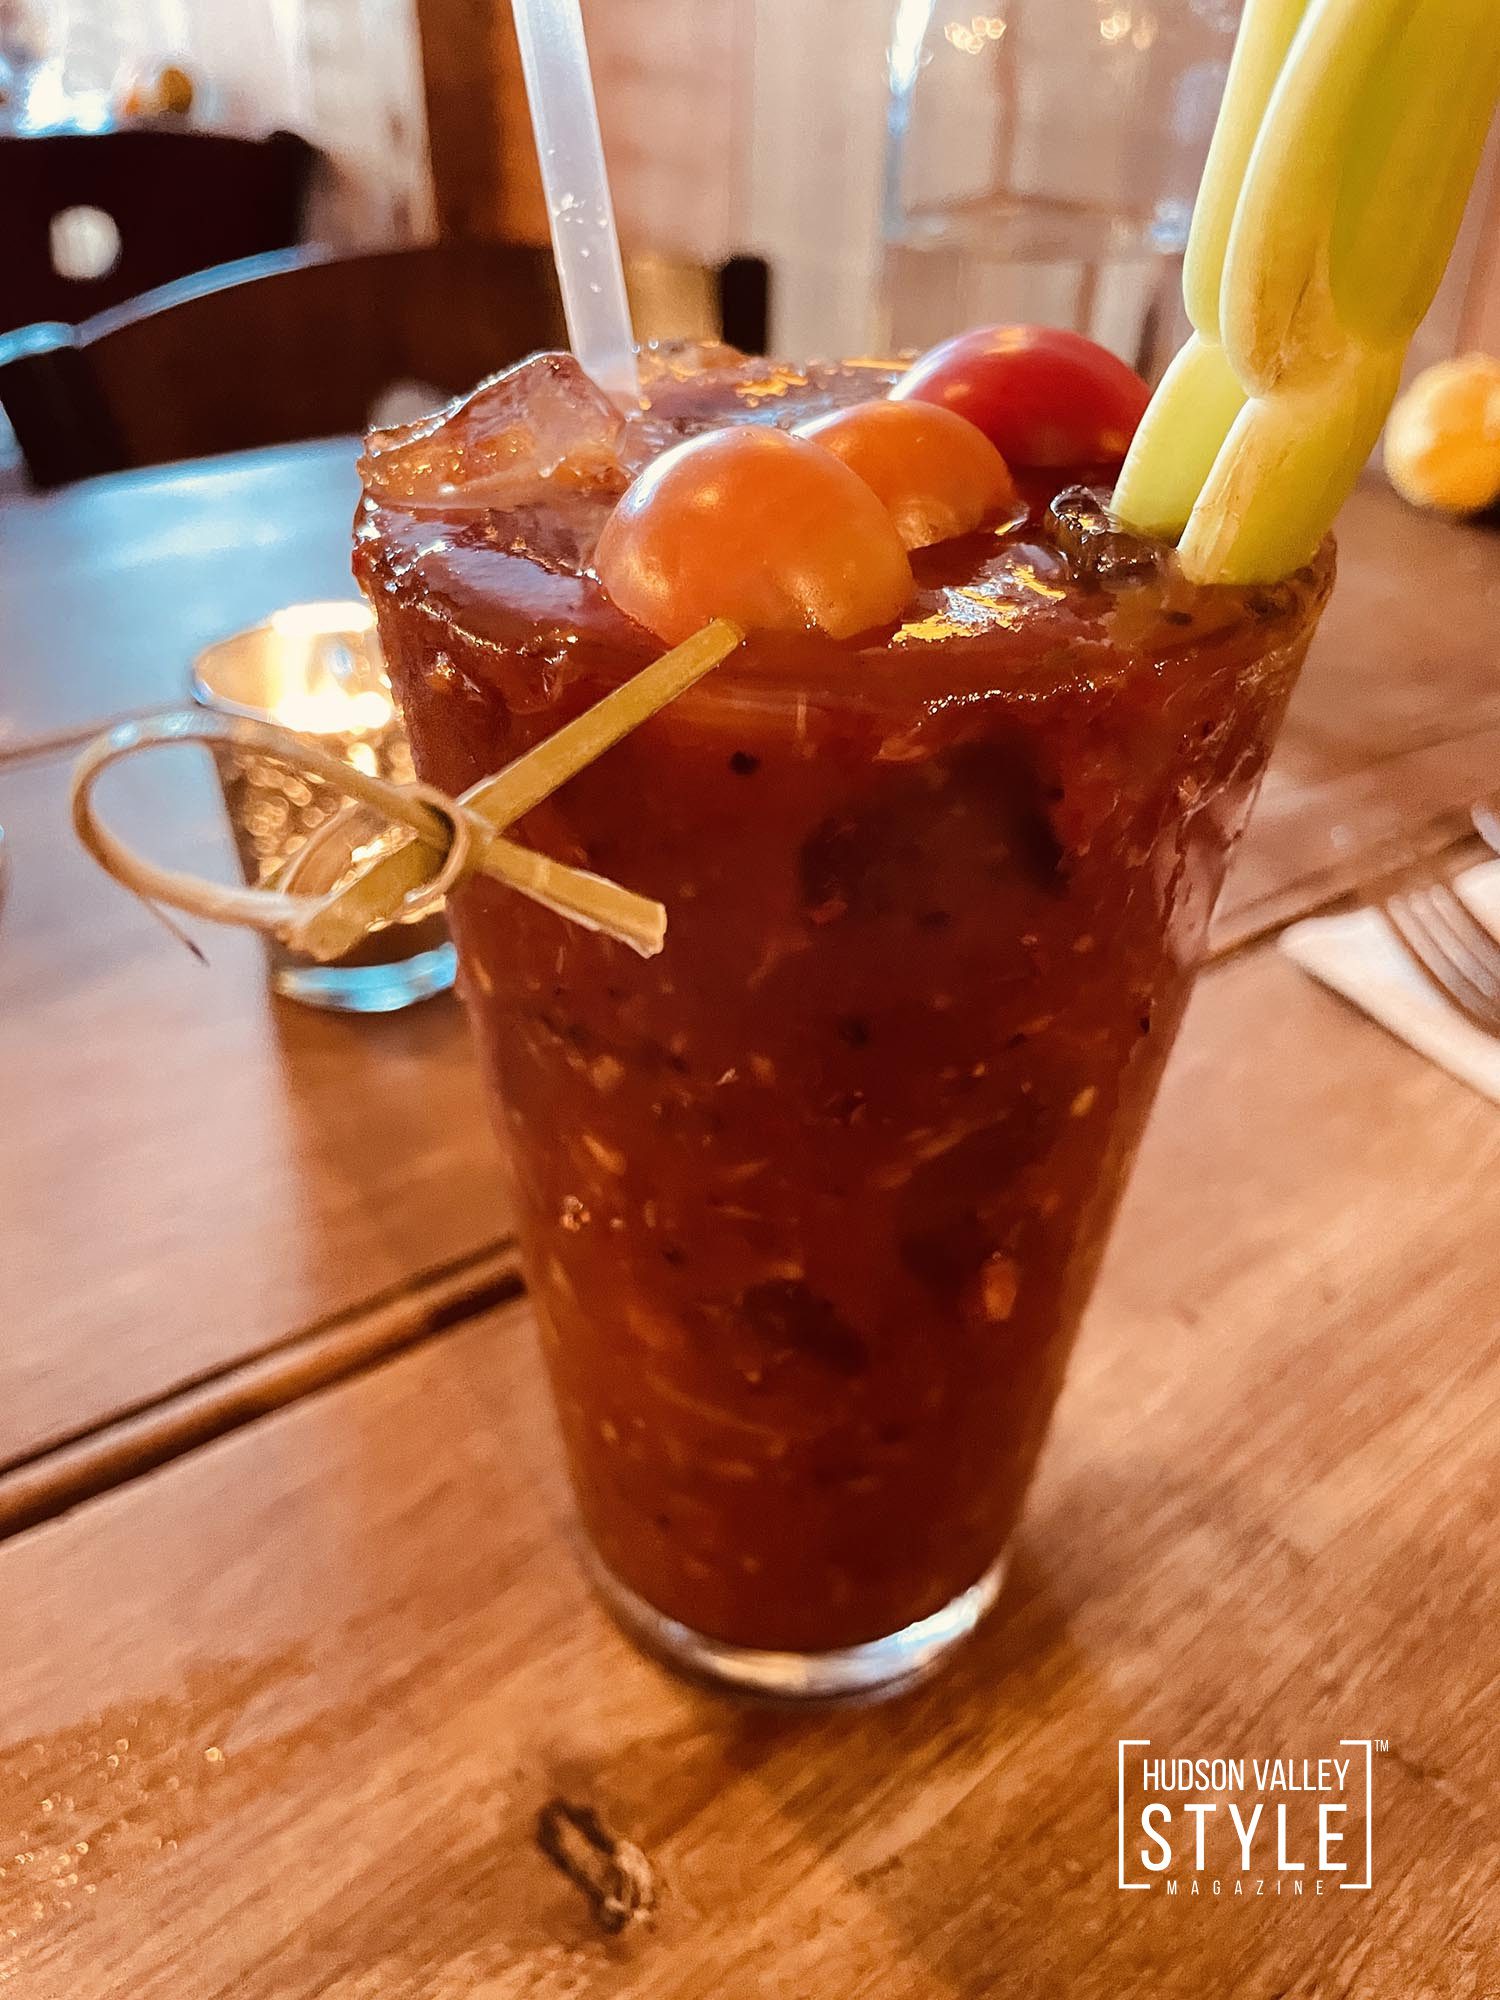 Chappie's Restaurant in Roxbury, NY: A Modern Rustic Dining Experience in the Heart of the Catskill Mountains – Restaurant Reviews with Maxwell Alexander